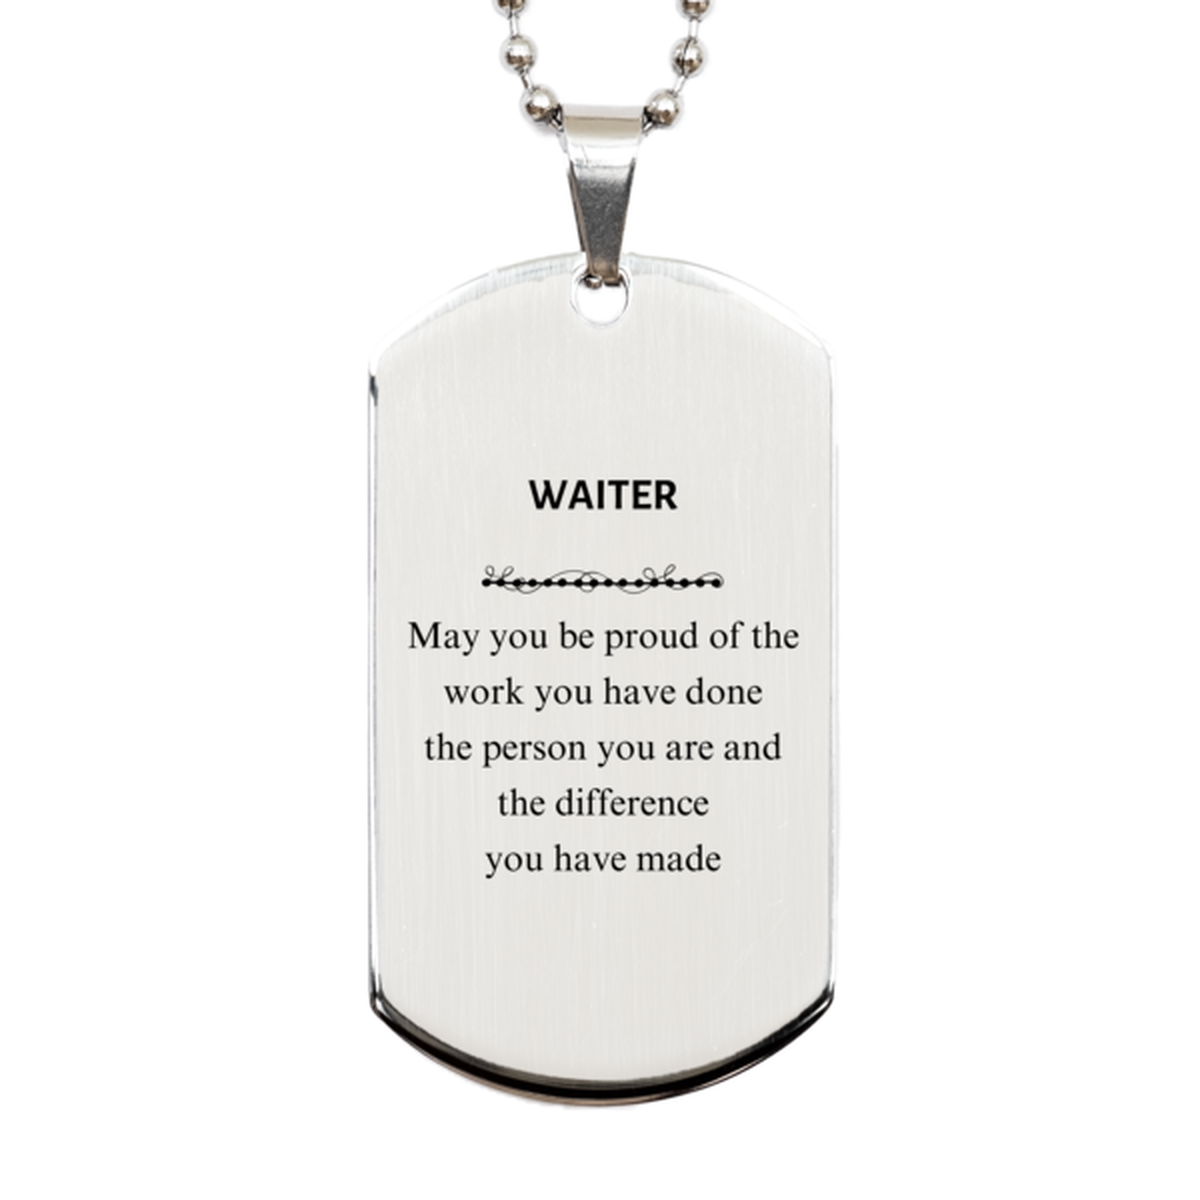 Waiter May you be proud of the work you have done, Retirement Waiter Silver Dog Tag for Colleague Appreciation Gifts Amazing for Waiter